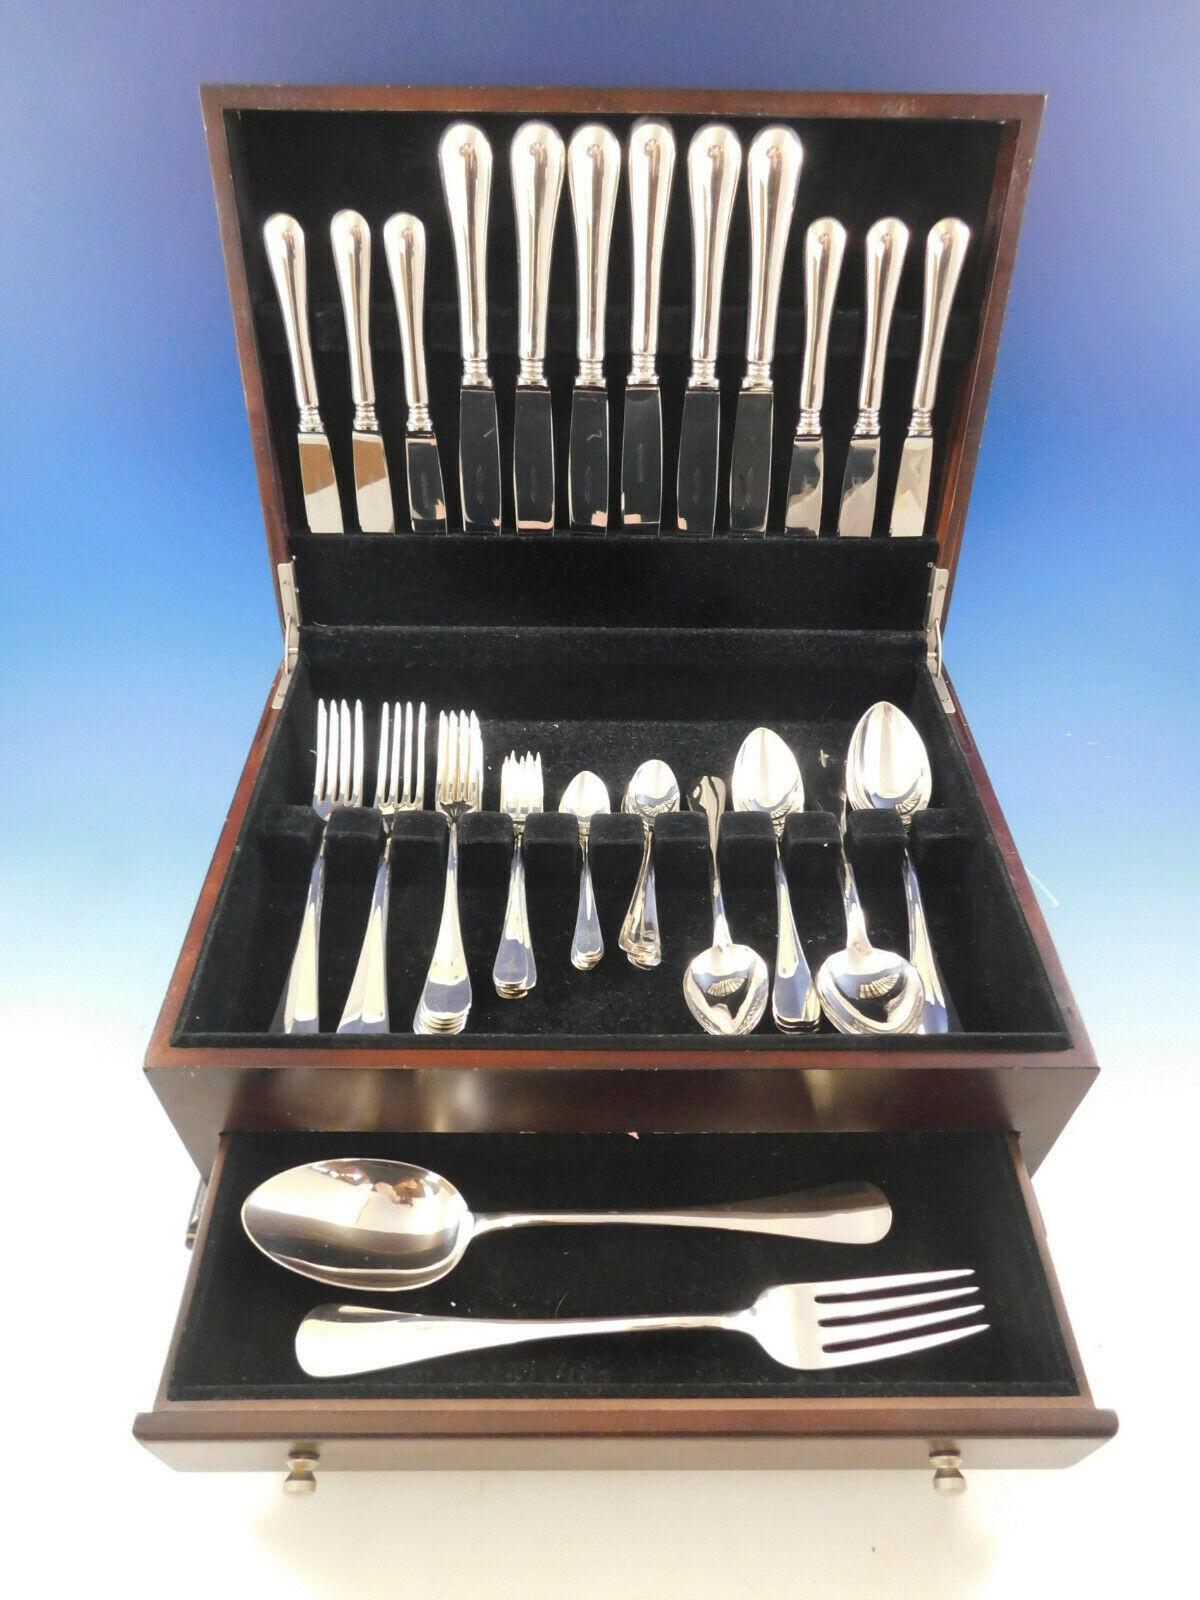 Dinner Size Queen Anne by Cesa 1882 Italy 800 silver flatware set - 56 pieces. This set includes:

6 Dinner Size Knives w/stainless blades, 10